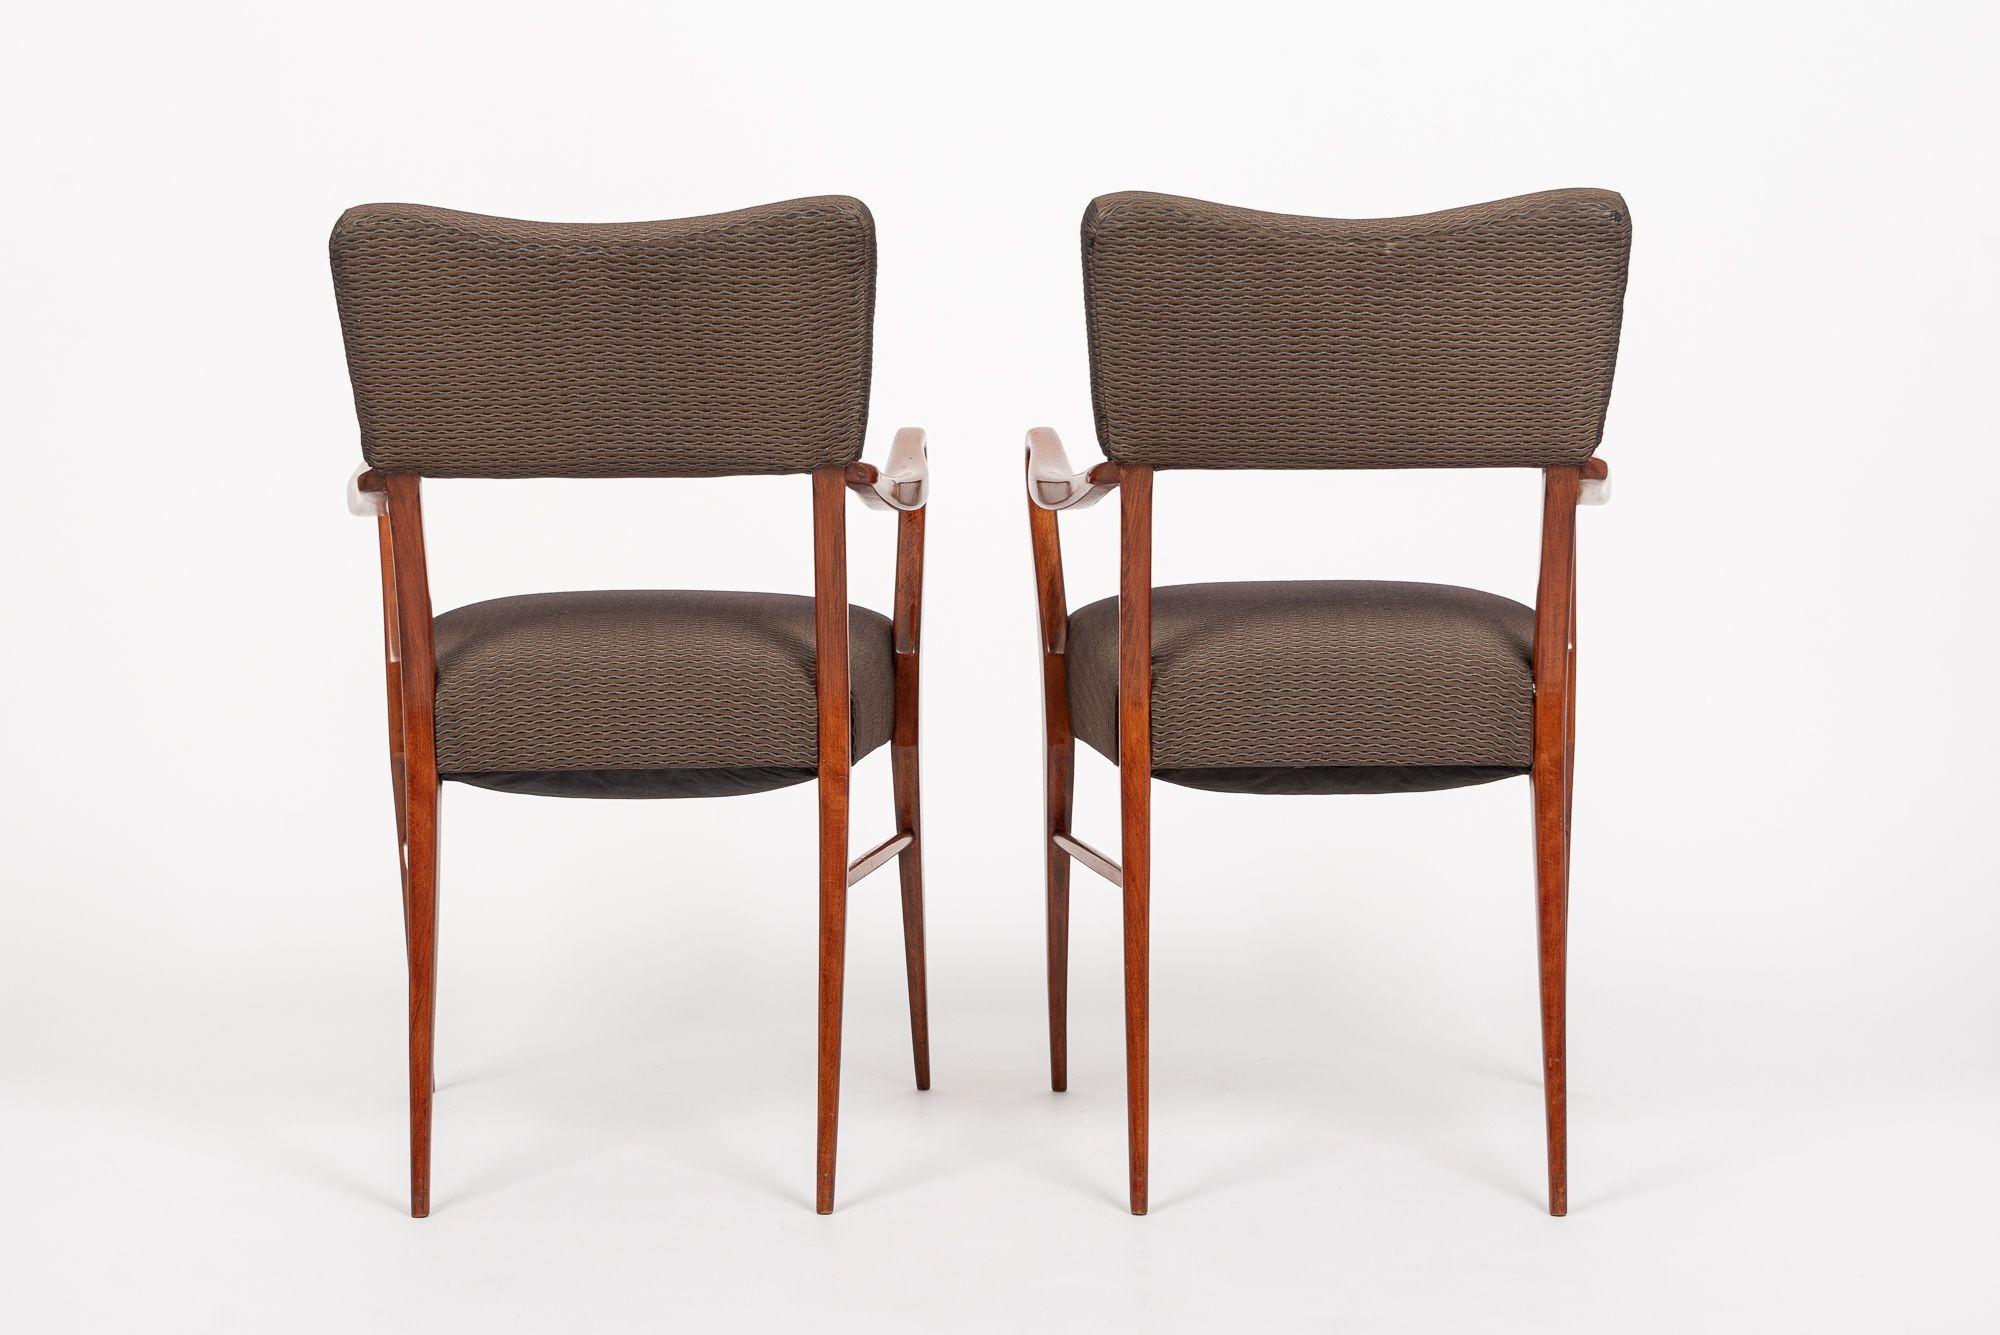 Upholstery Pair of Mid Century Wood & Brown Upholstered Arm Chairs 1950s